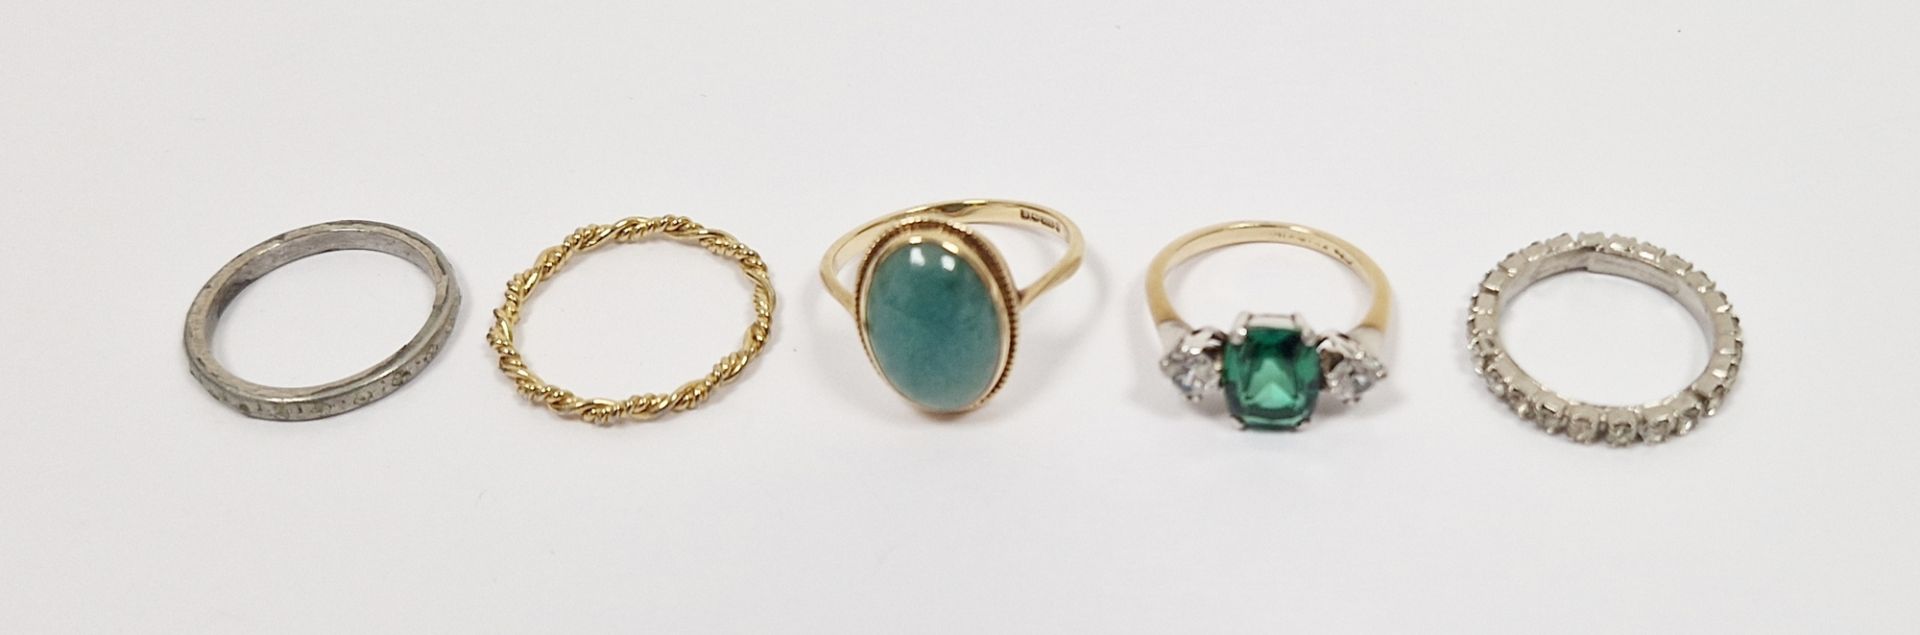 LOT WITHDRAWN 9ct gold, silver, green and white stone dress ring, 9ct gold and blue stone dress ring